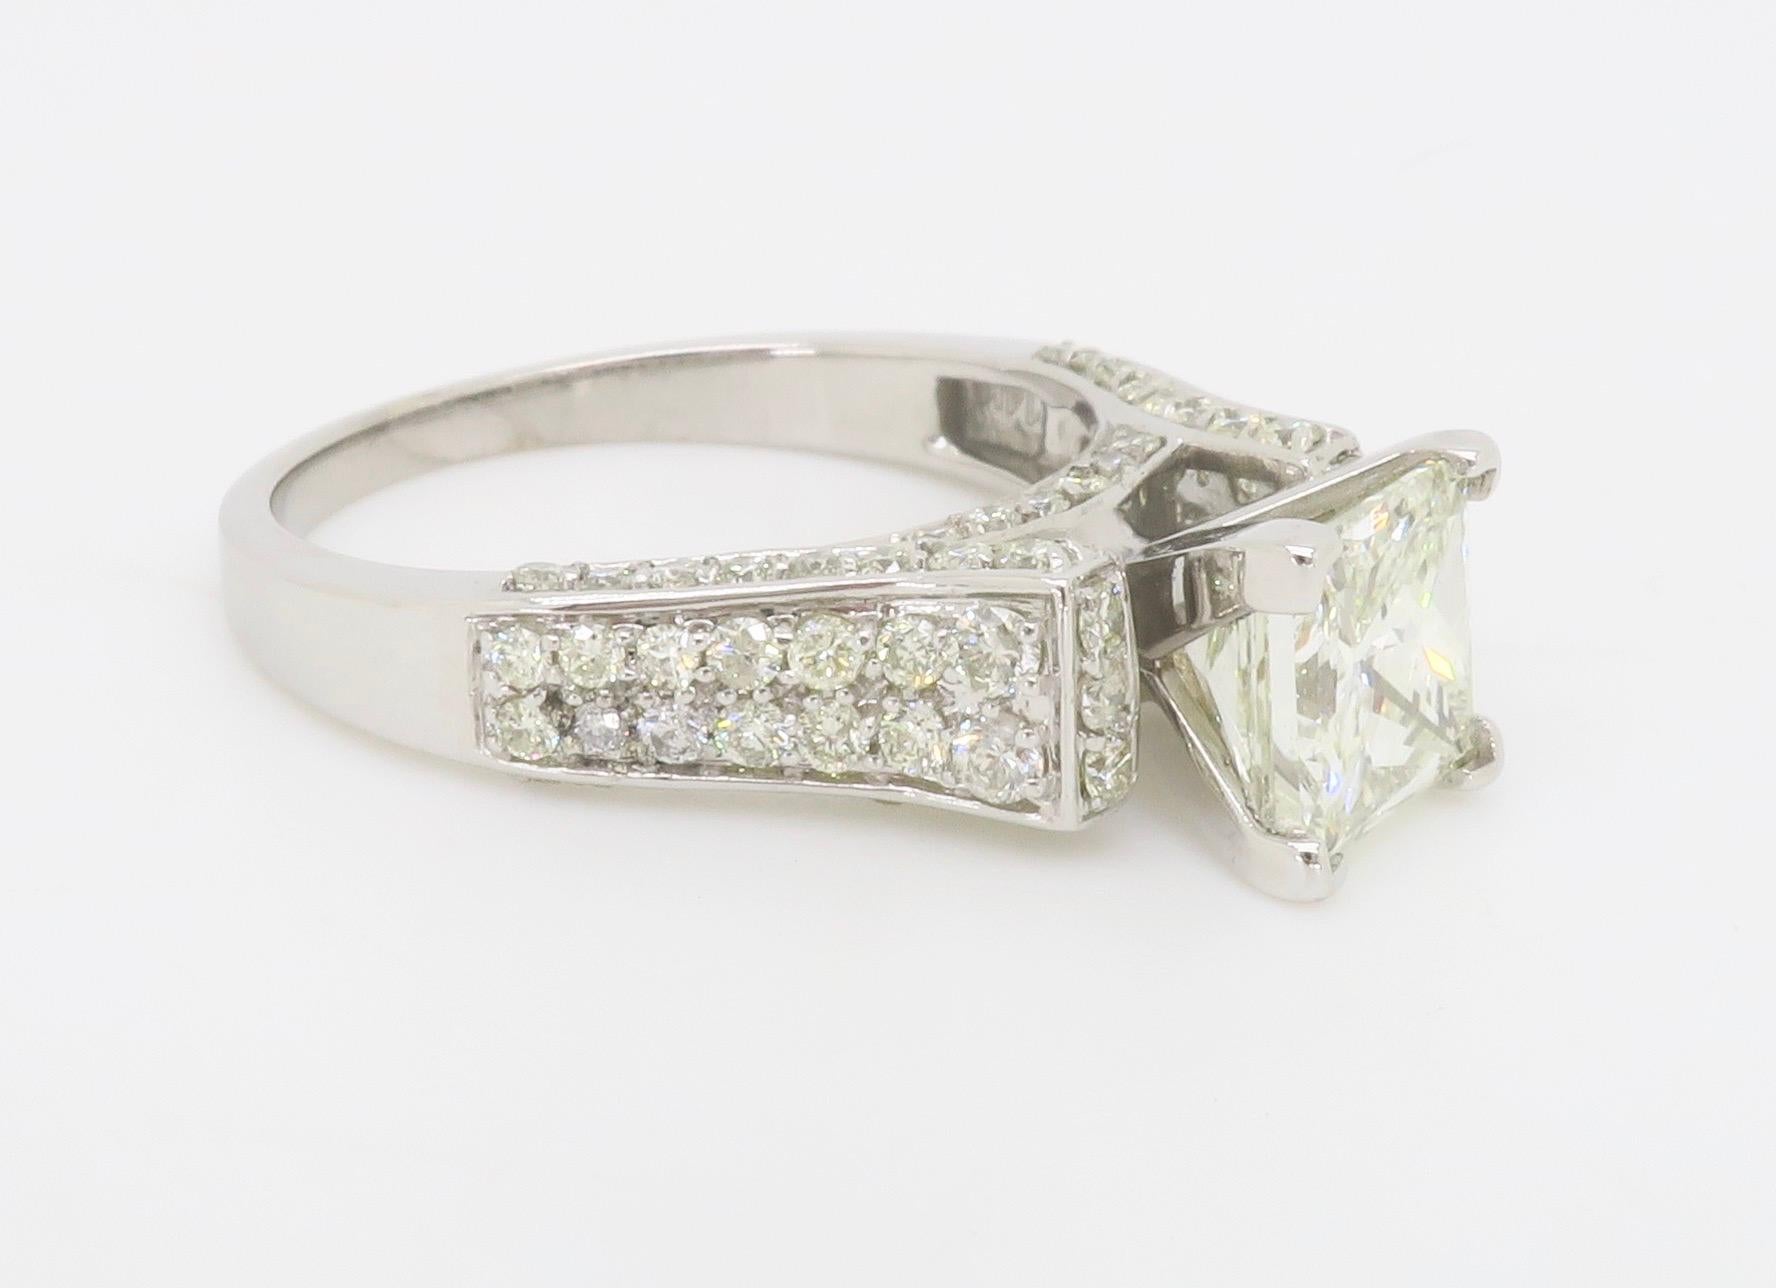 Certified 2.59ctw Princess Cut Diamond Engagement Ring For Sale 8